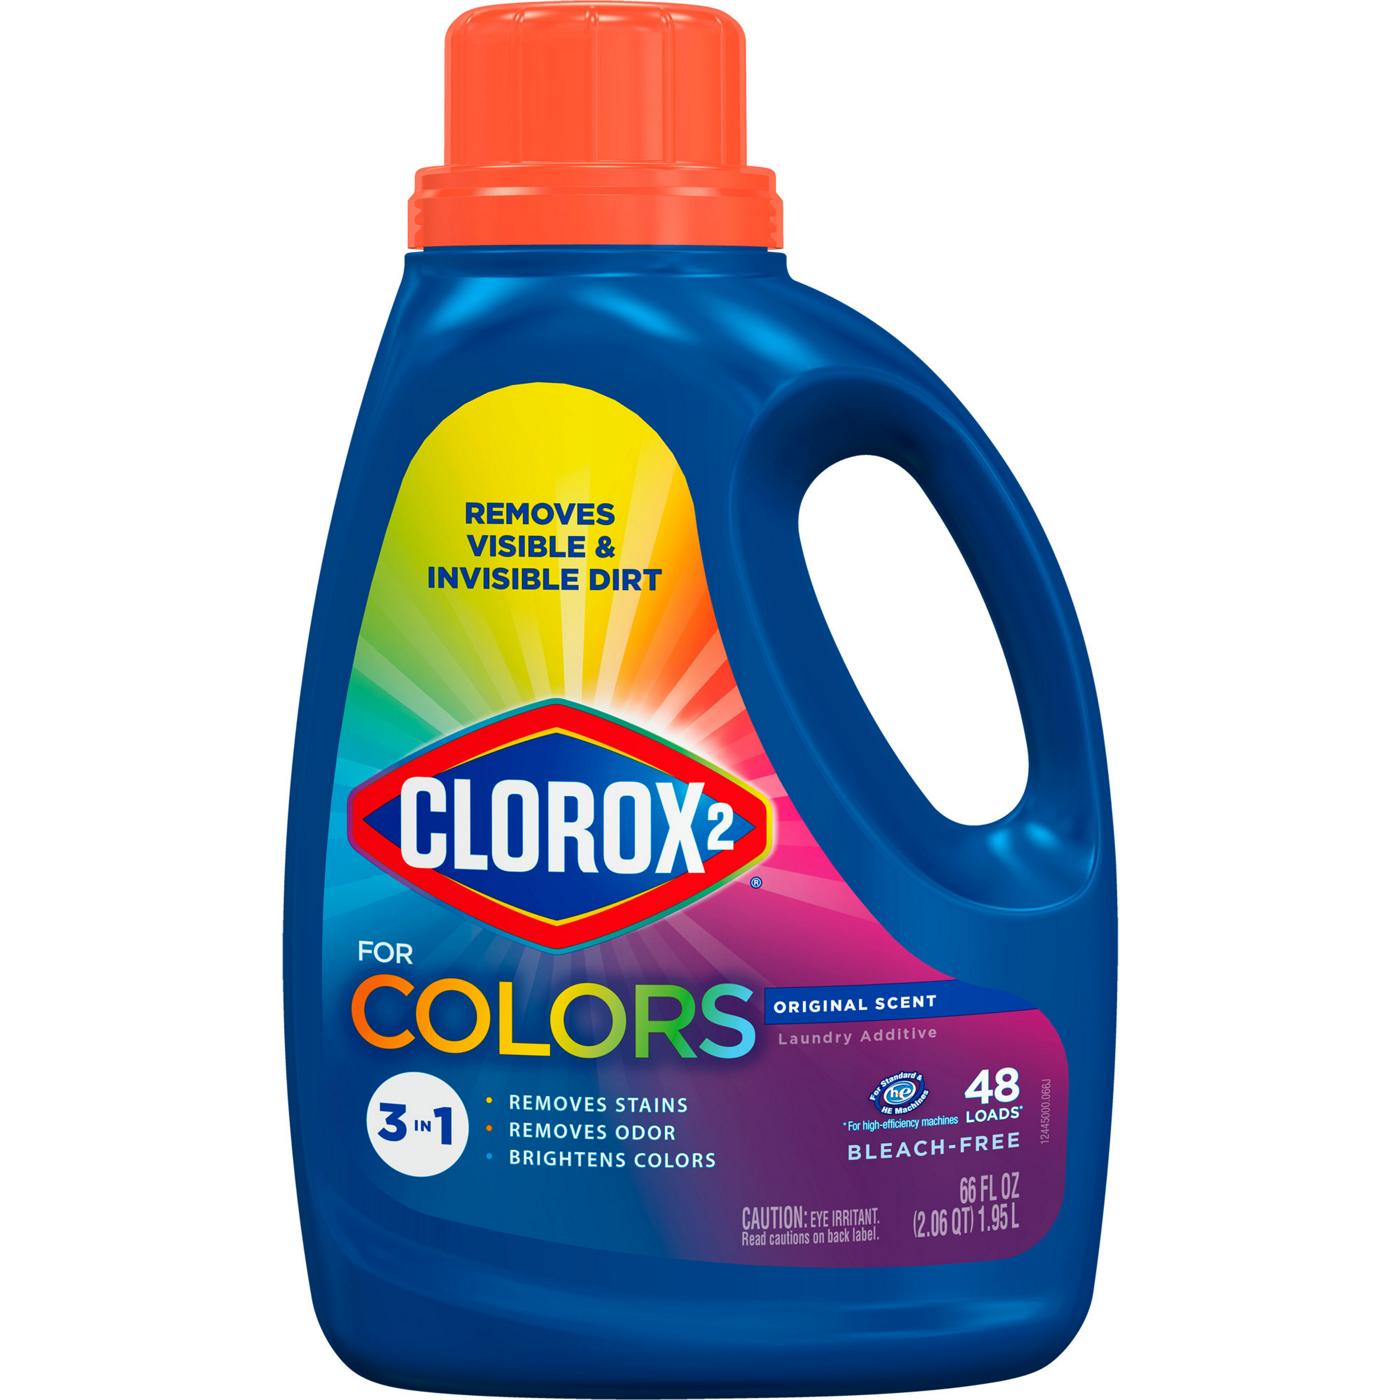 Clorox 2 2 for Colors 3-in-1 HE Laundry Additive, 48 Loads - Original; image 1 of 4